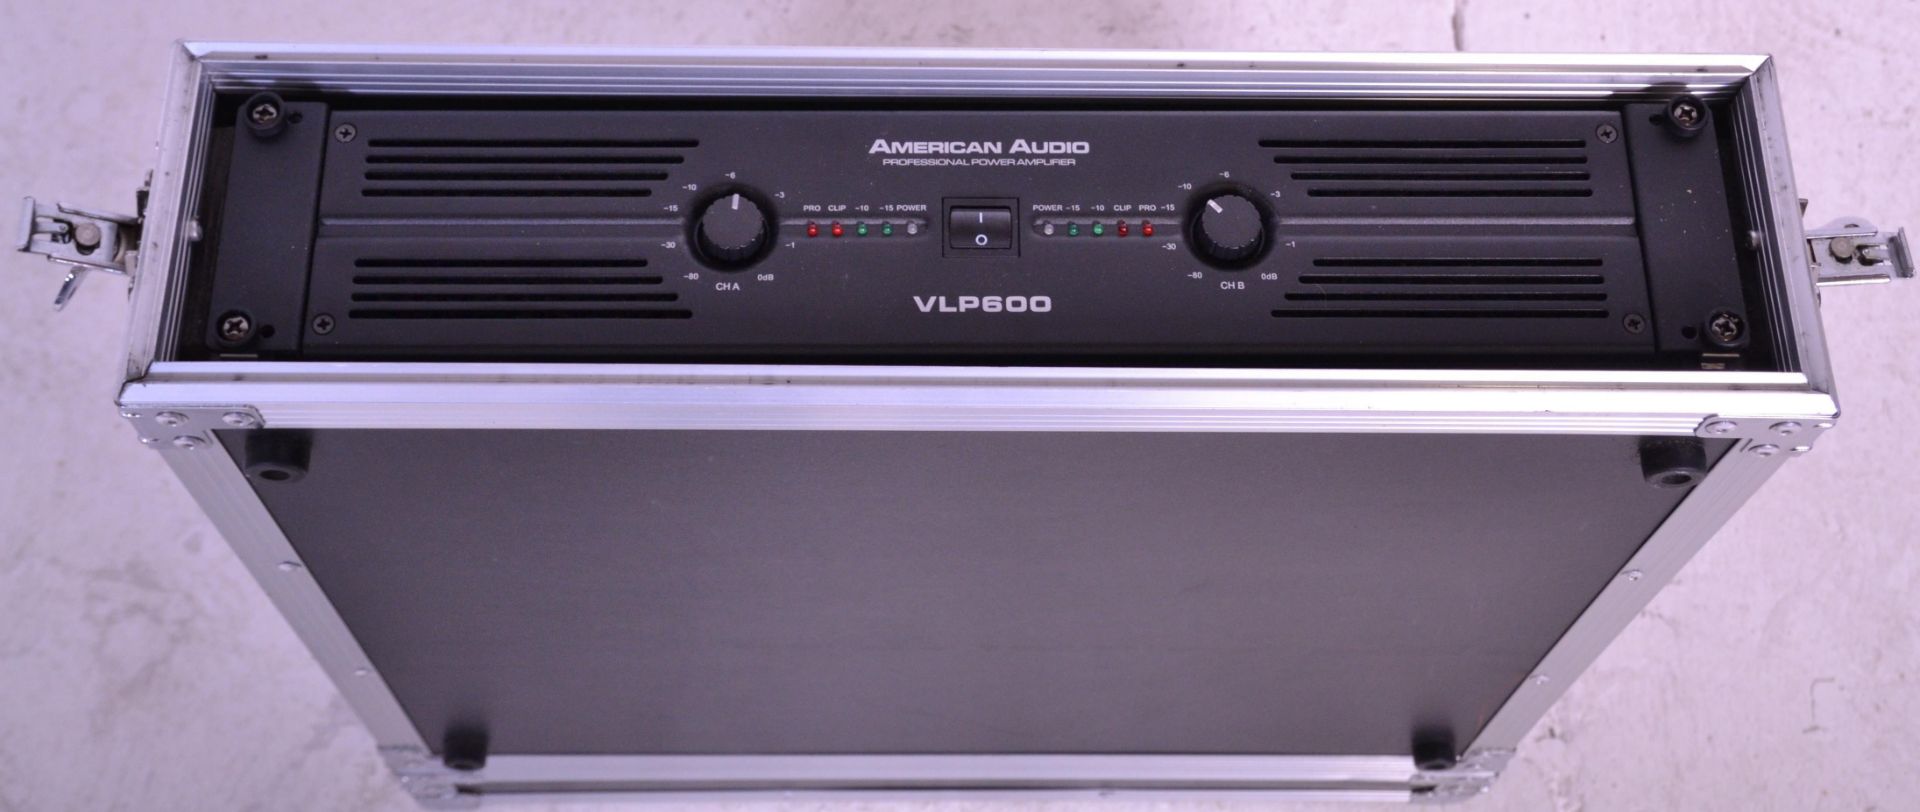 An American Audio Professional Power Amp  - Amplifier model no VLP600 complete in a good Citronic